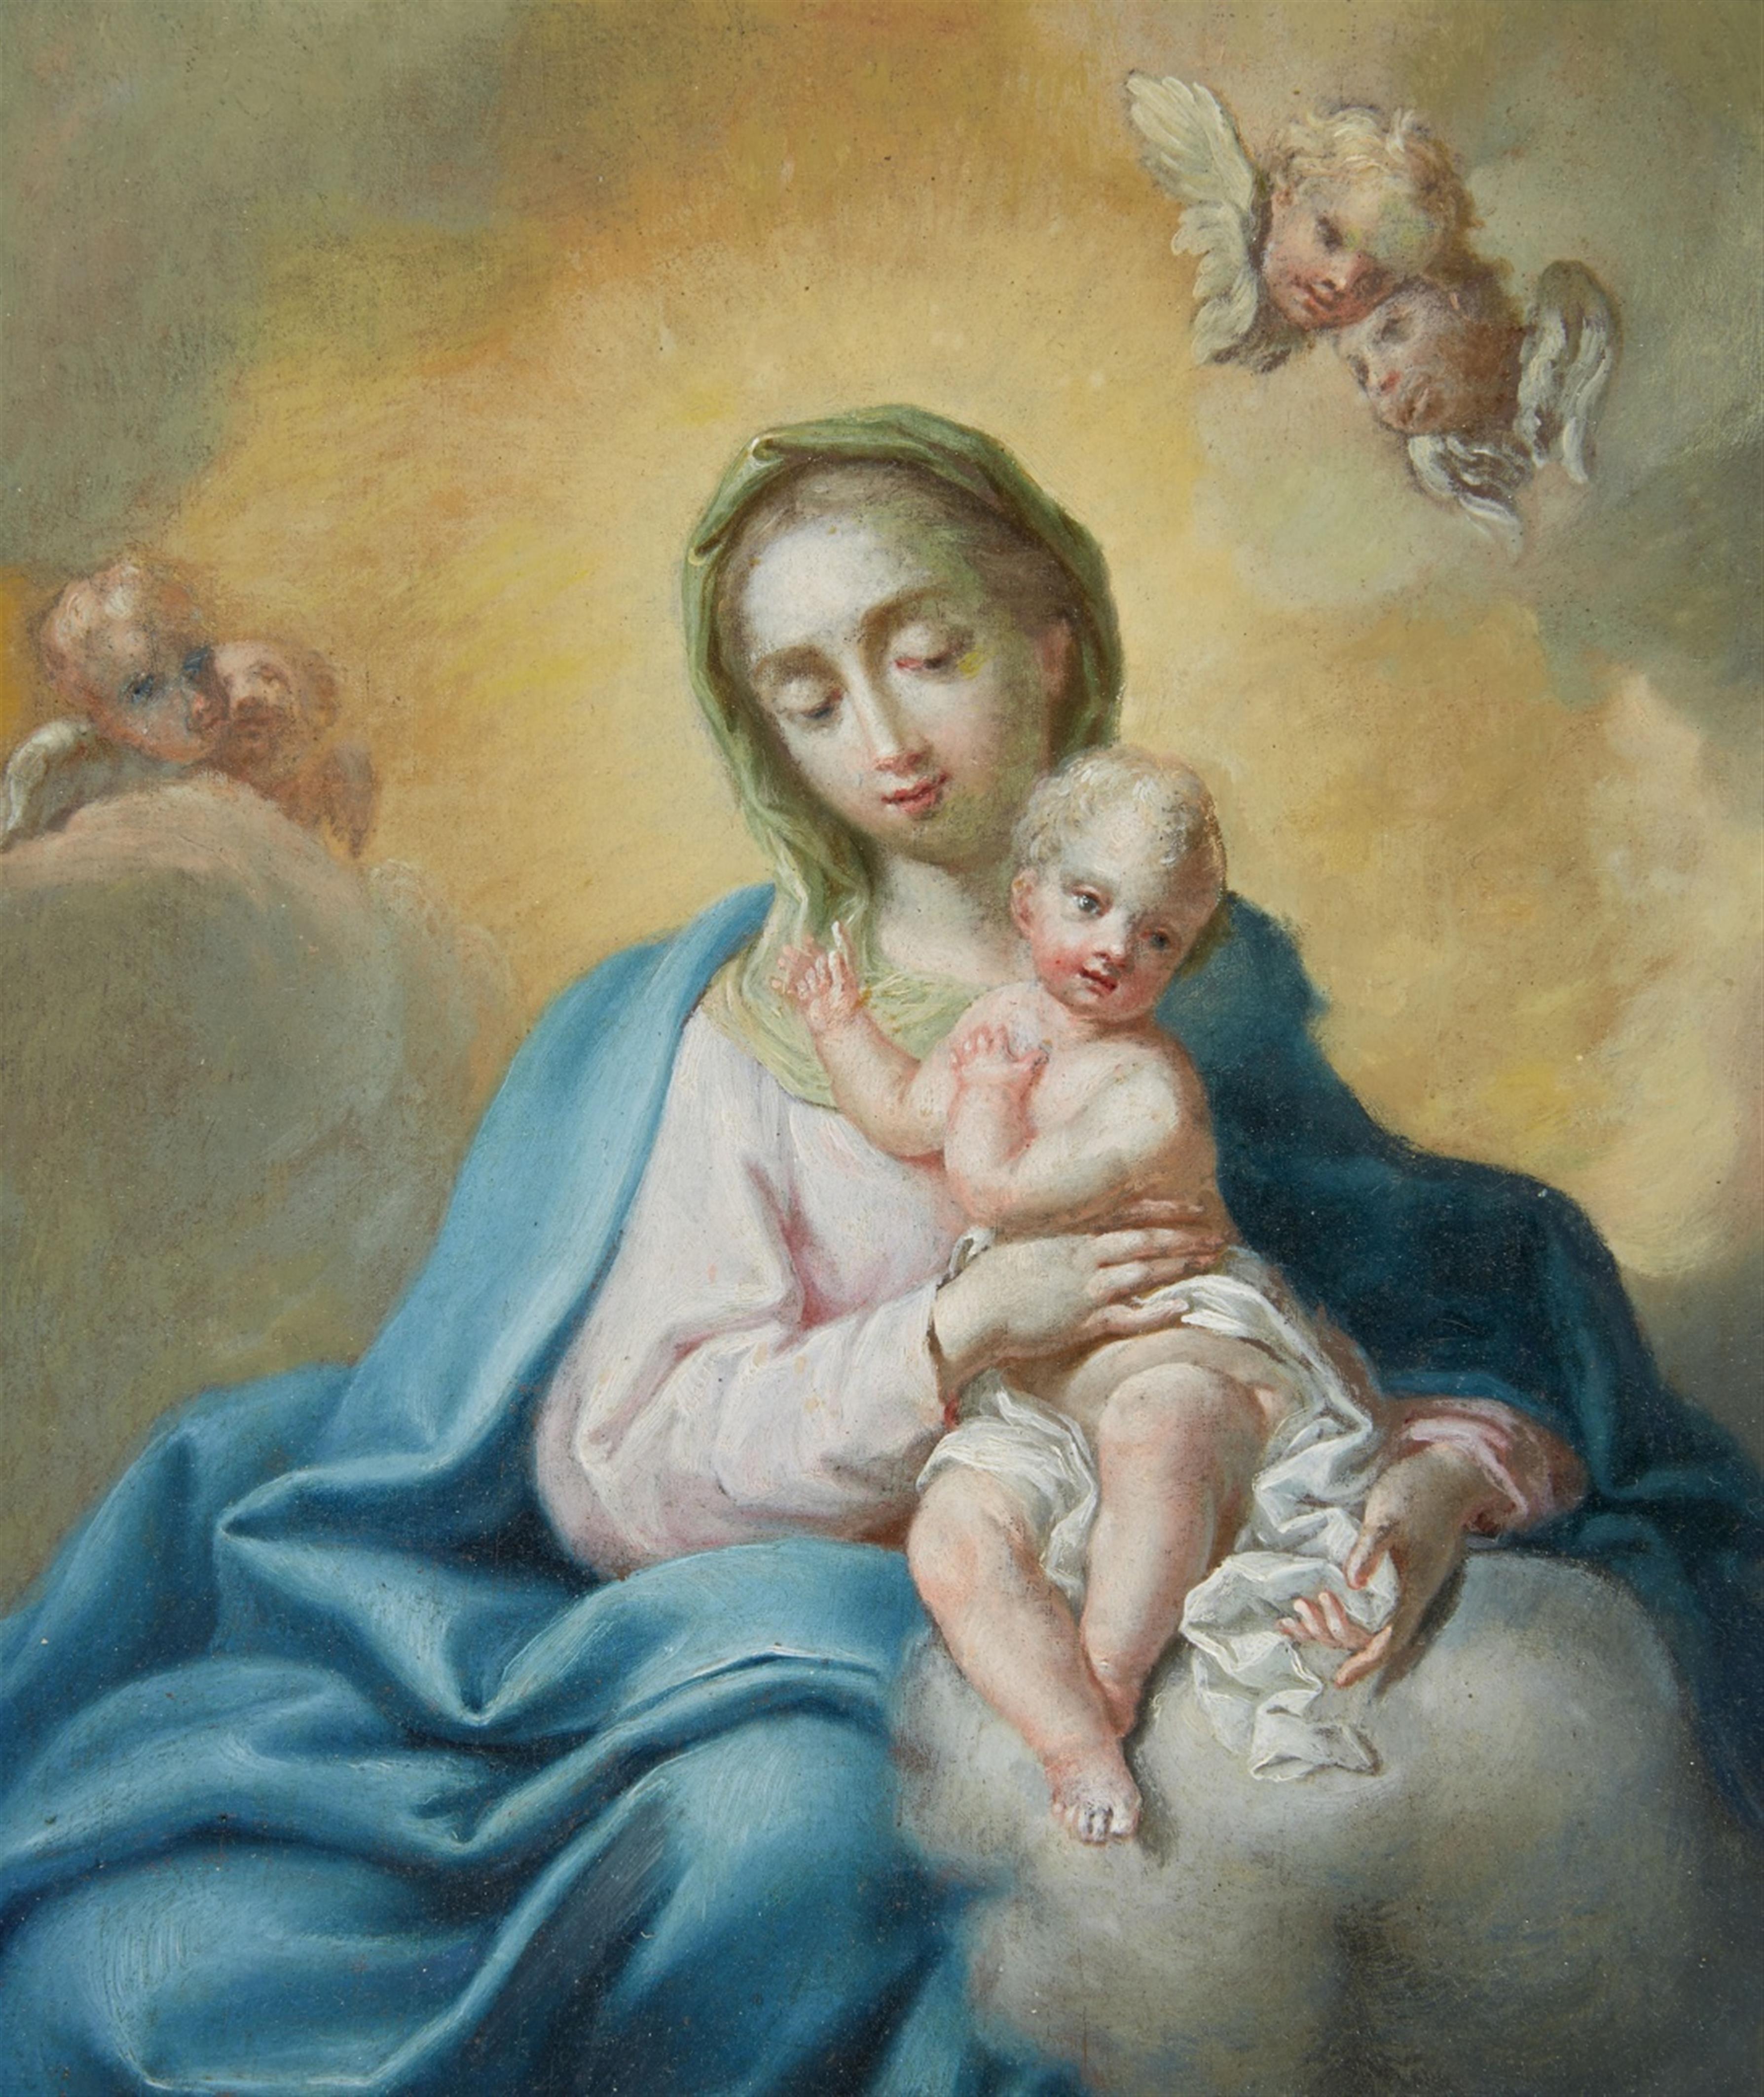 South German School 18th century - The Virgin and Child with Putti - image-1